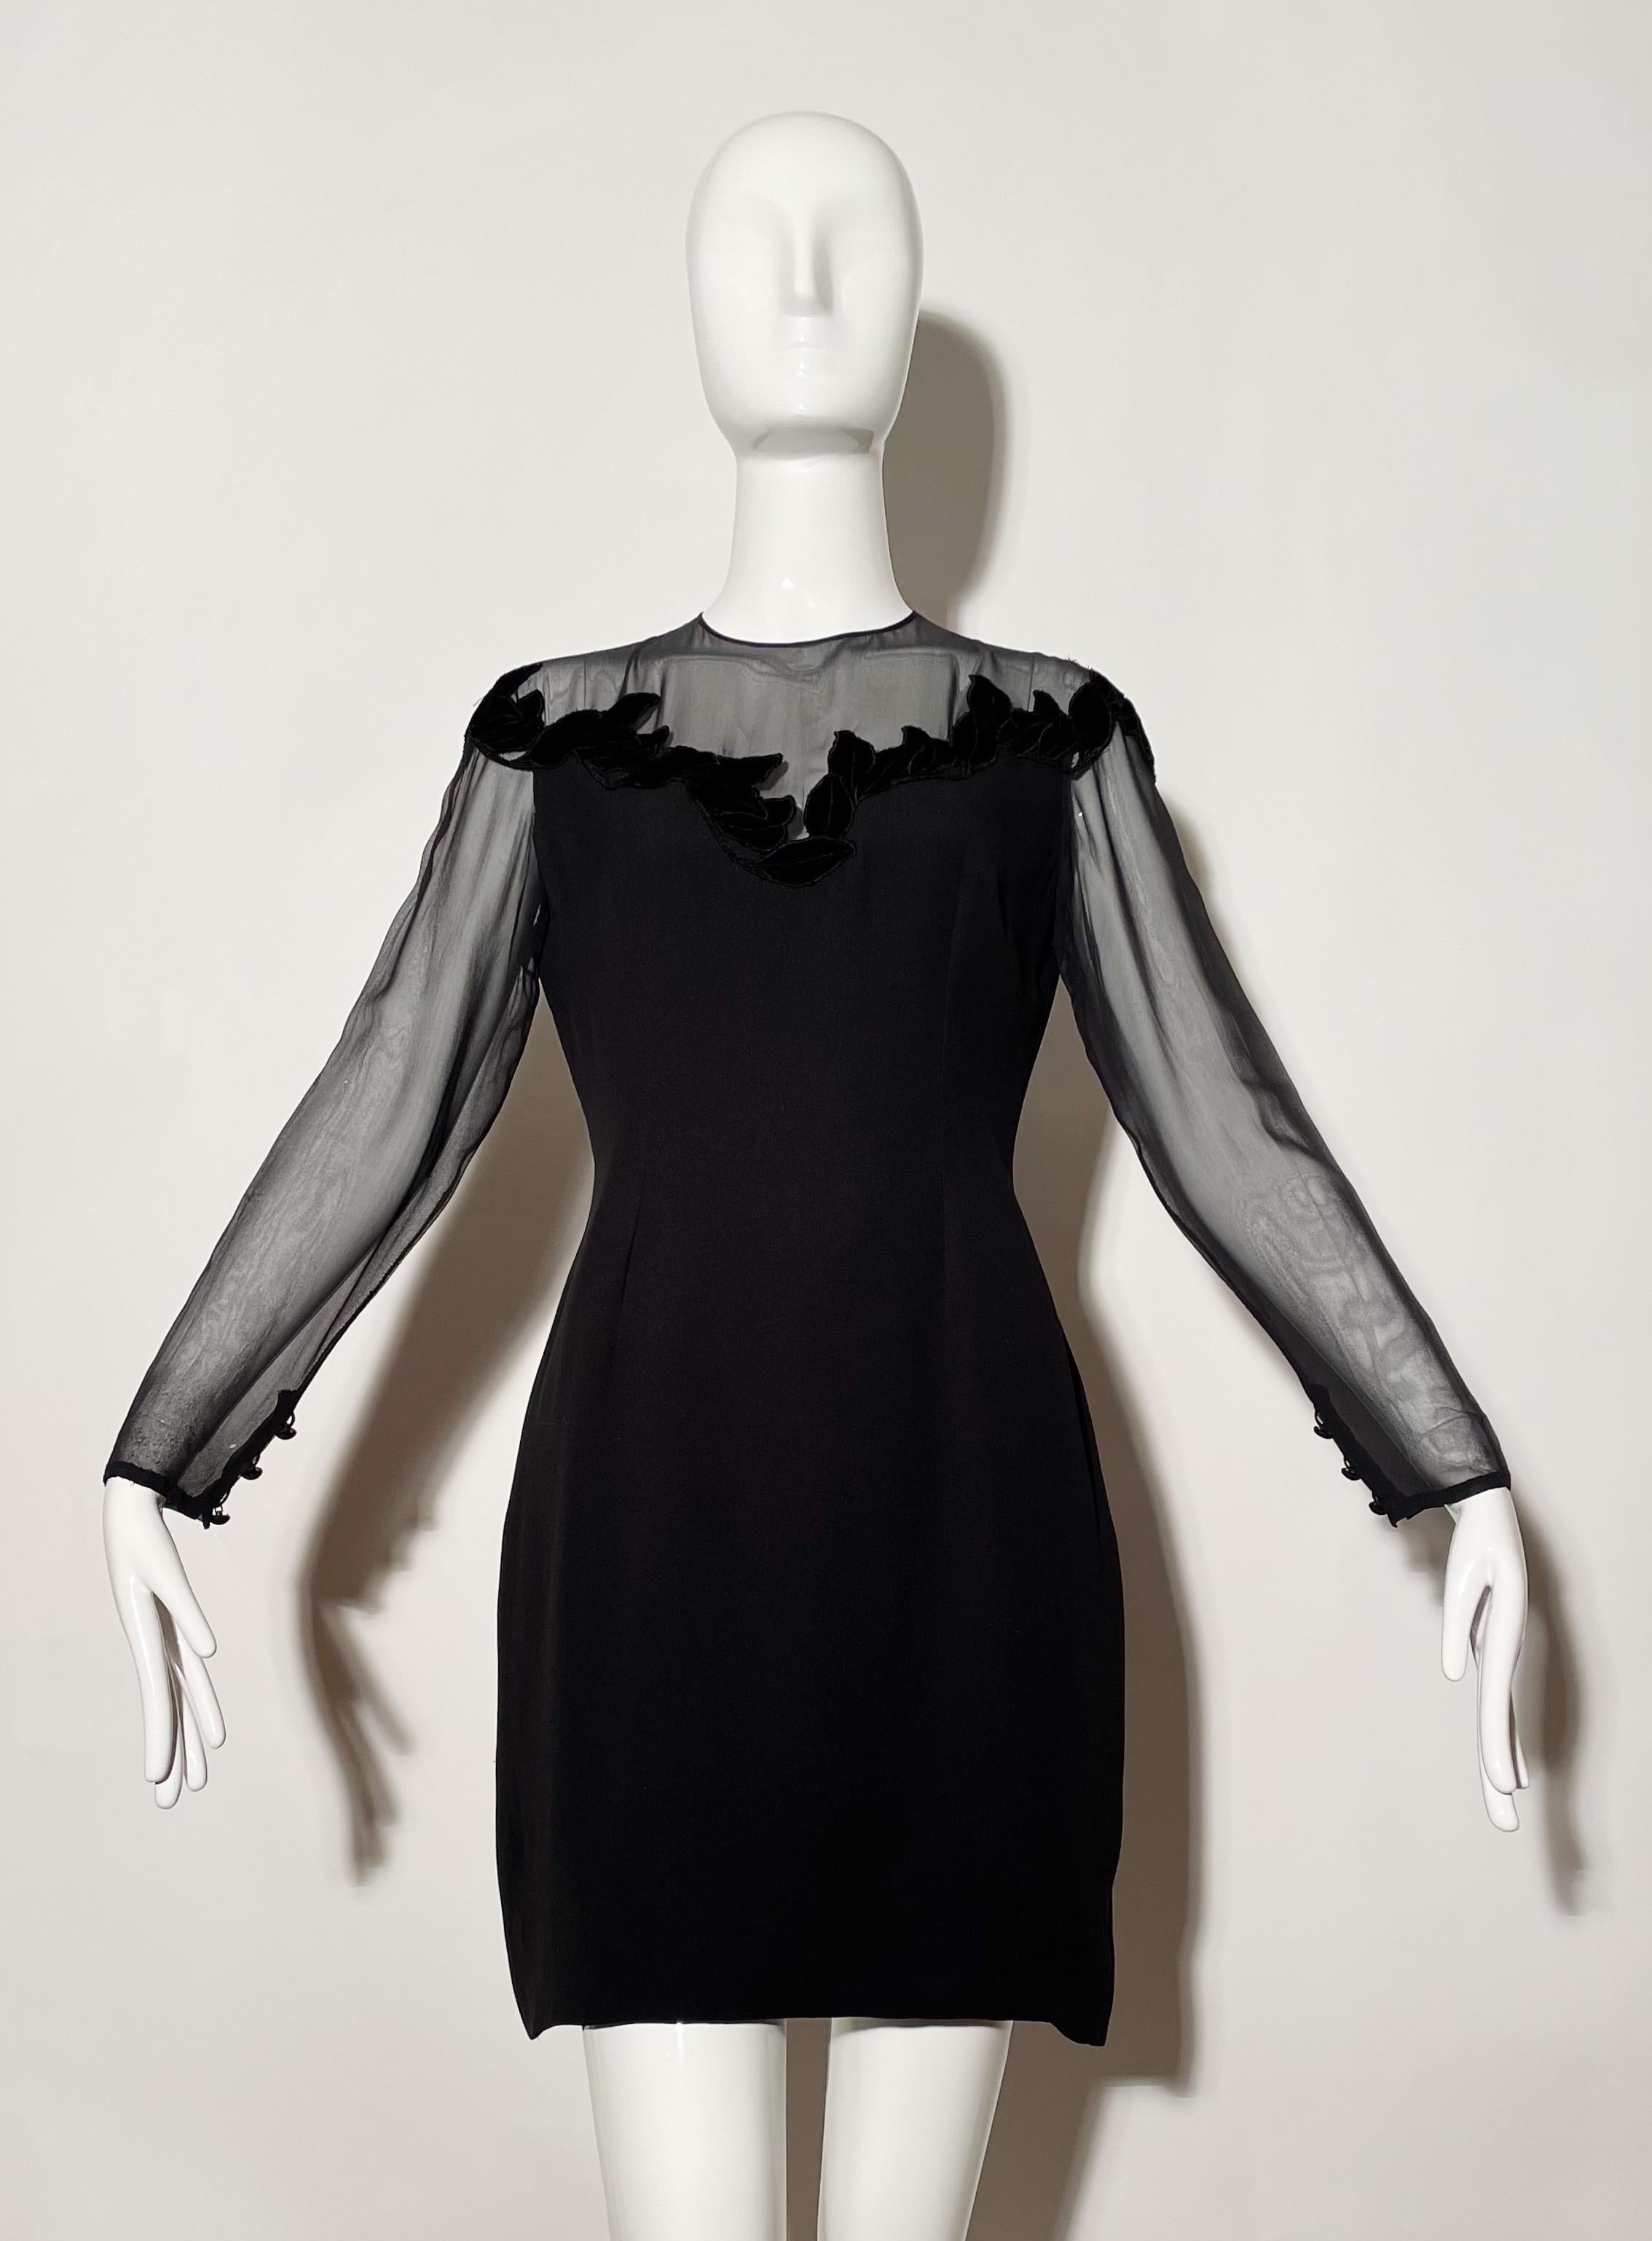 Black cocktail dress. Sheer upper body, velvet trim. Lined. Rear button and zipper closure.
*Condition: excellent vintage condition. No visible flaws.

Measurements Taken Laying Flat (inches)—
Shoulder to Shoulder: 17 in.
Bust: 34 in.
Waist: 29